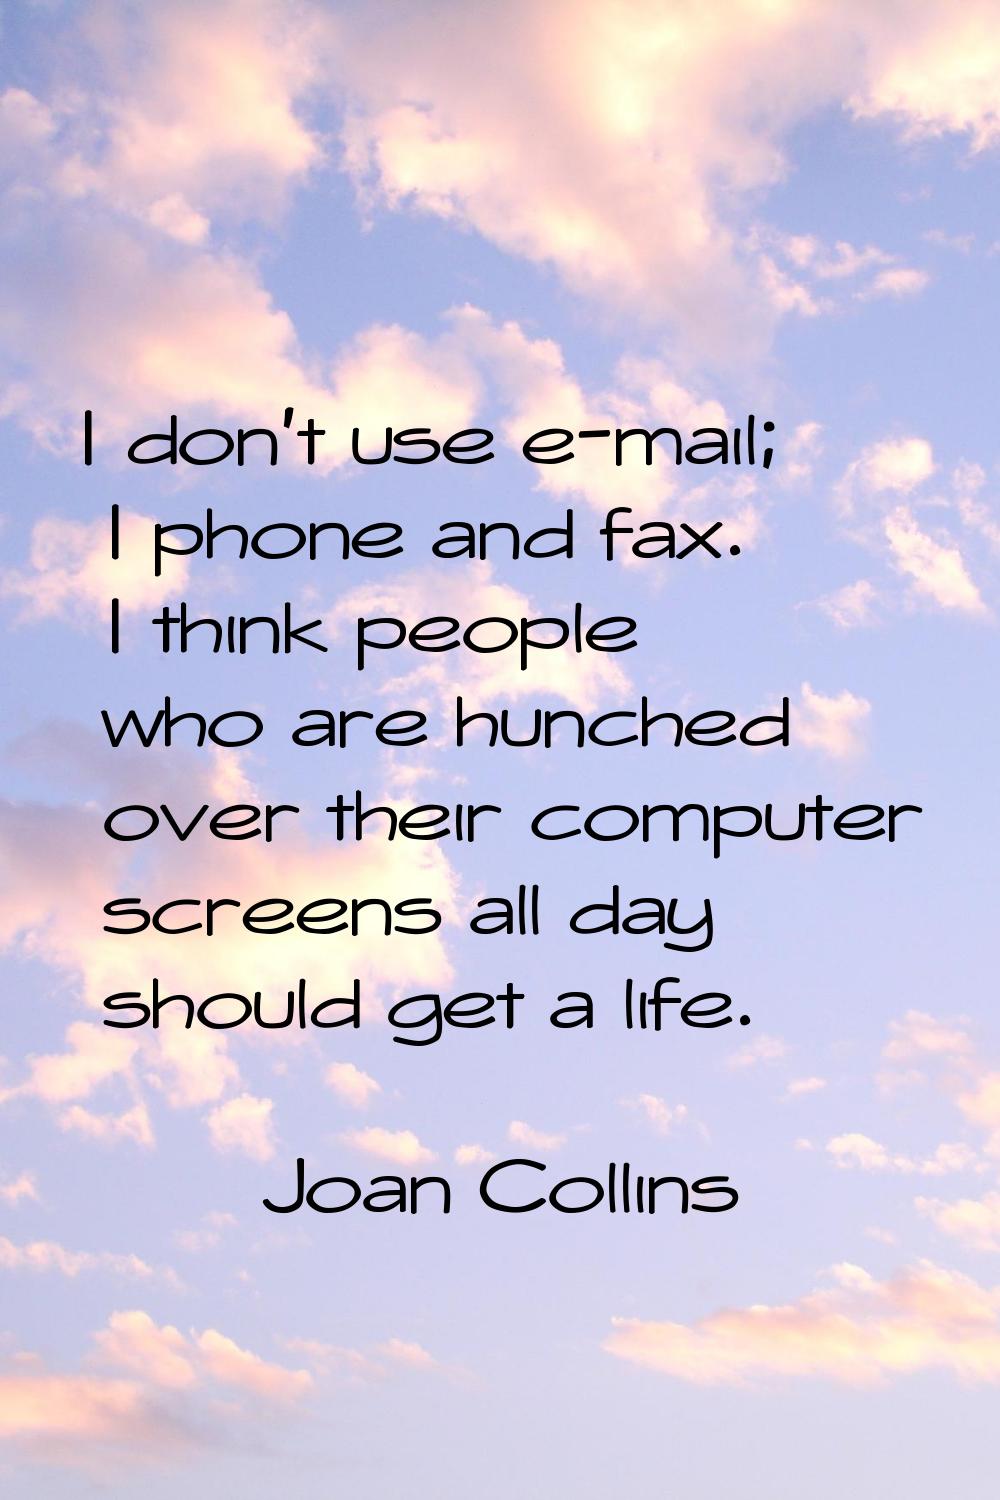 I don't use e-mail; I phone and fax. I think people who are hunched over their computer screens all